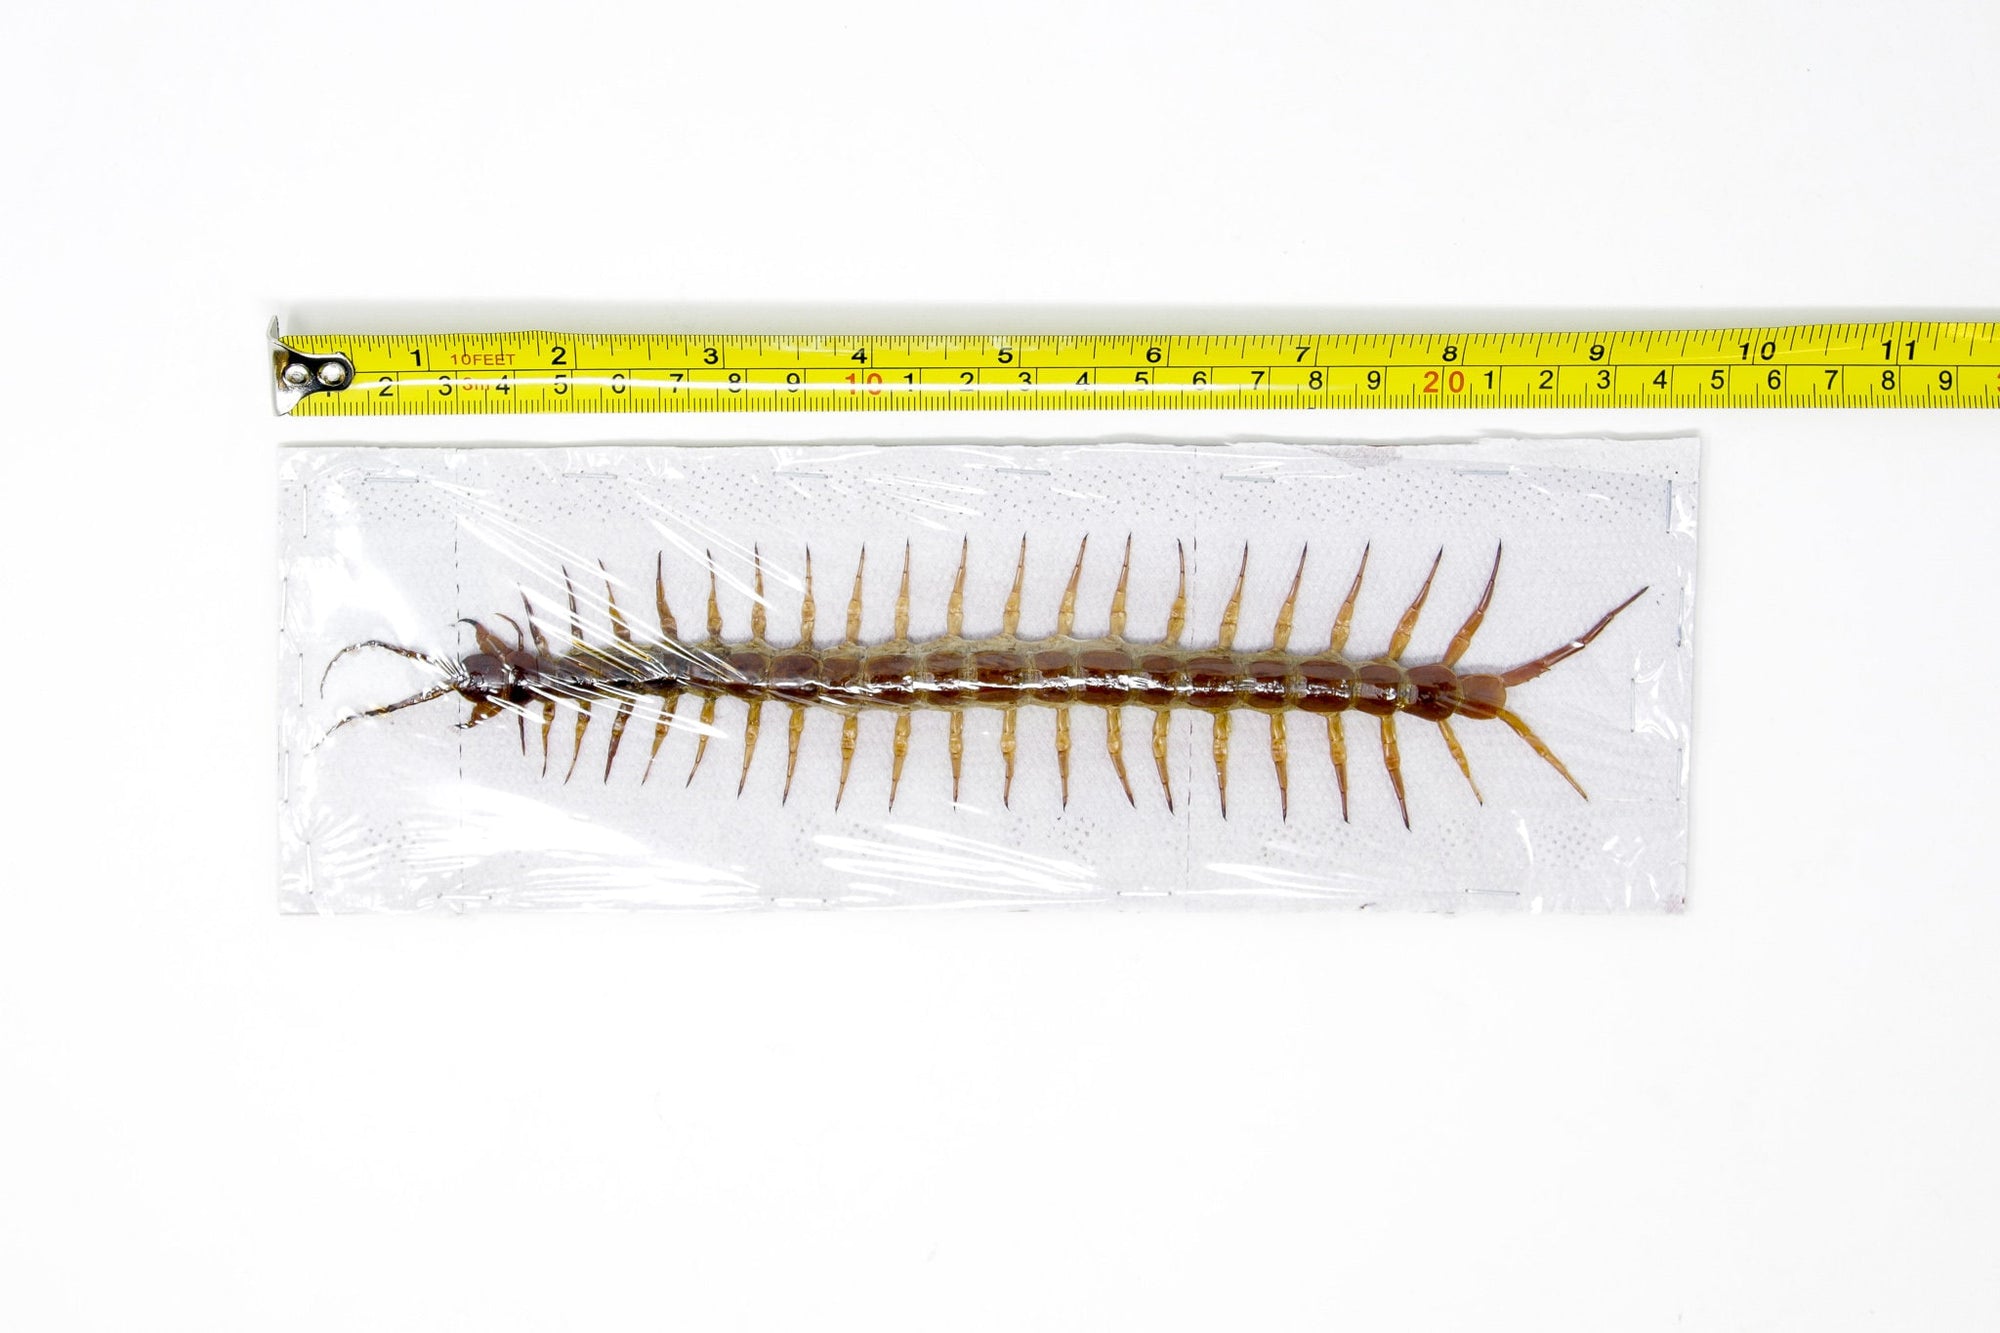 TWO (2) Giant Centipede (Scolopendra subspinipes) 6-8 Inches Spread Specimens